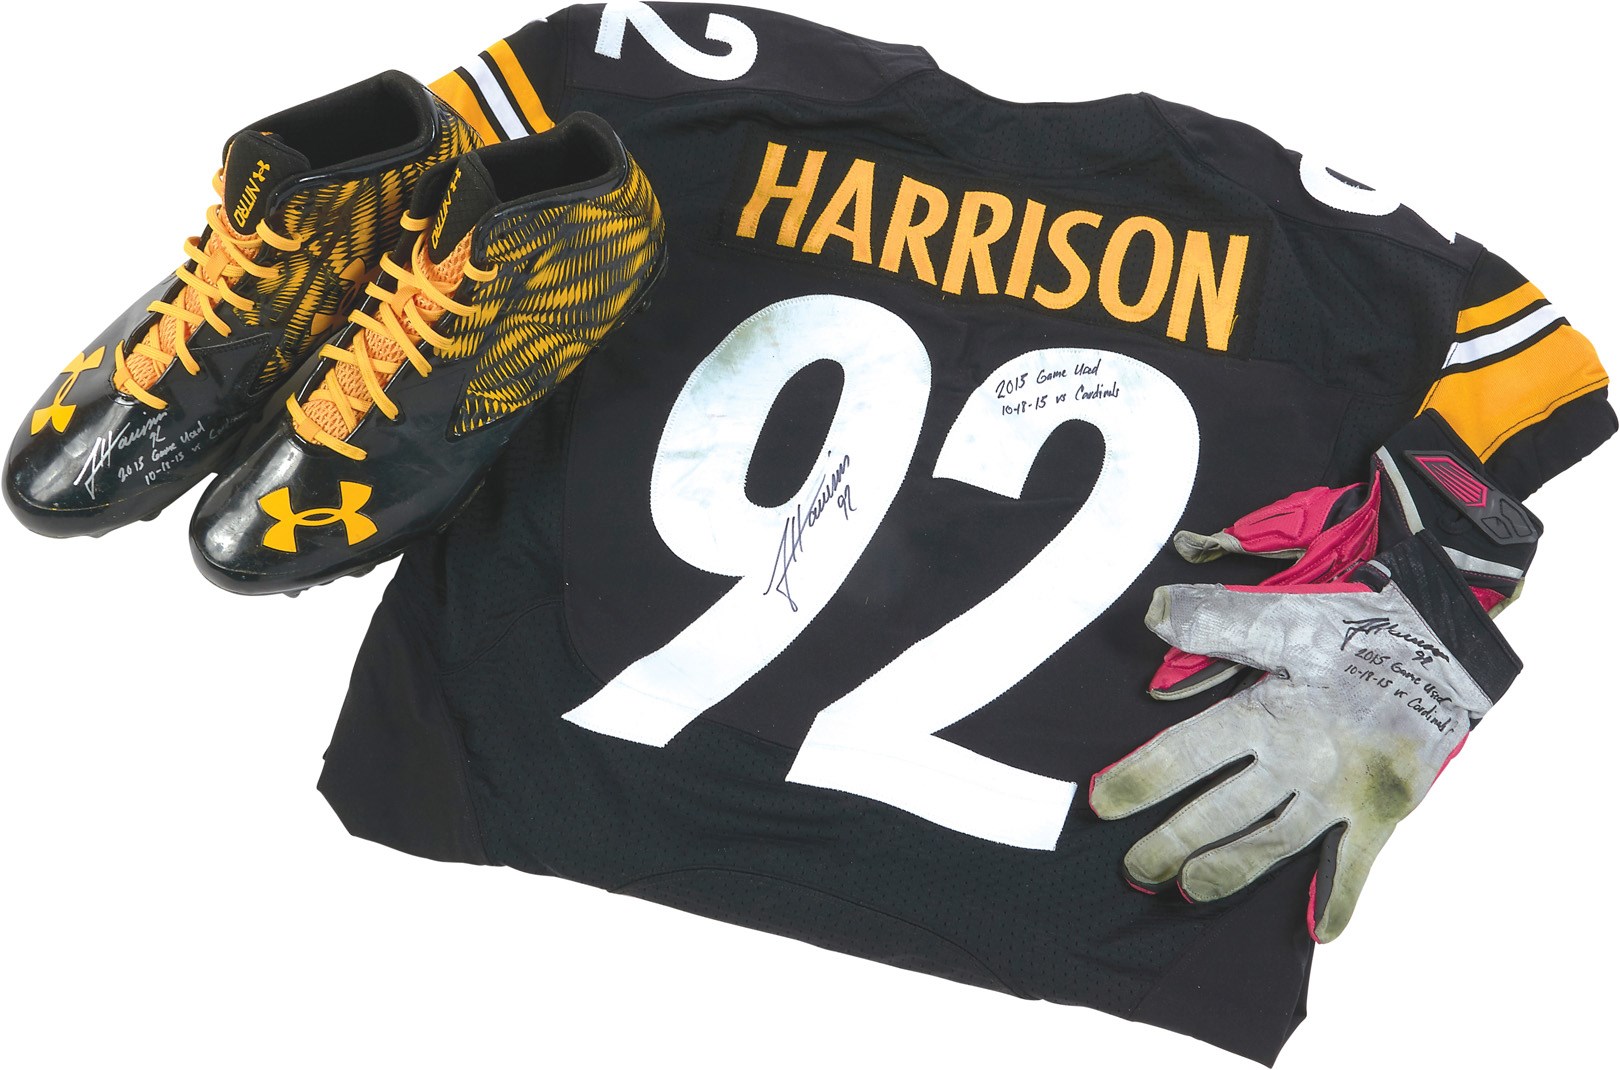 - October 18, 2015 James Harrison Pittsburgh Steelers Game Worn Jersey, Cleats and Gloves (Photo-Matched, Harrison Letters)